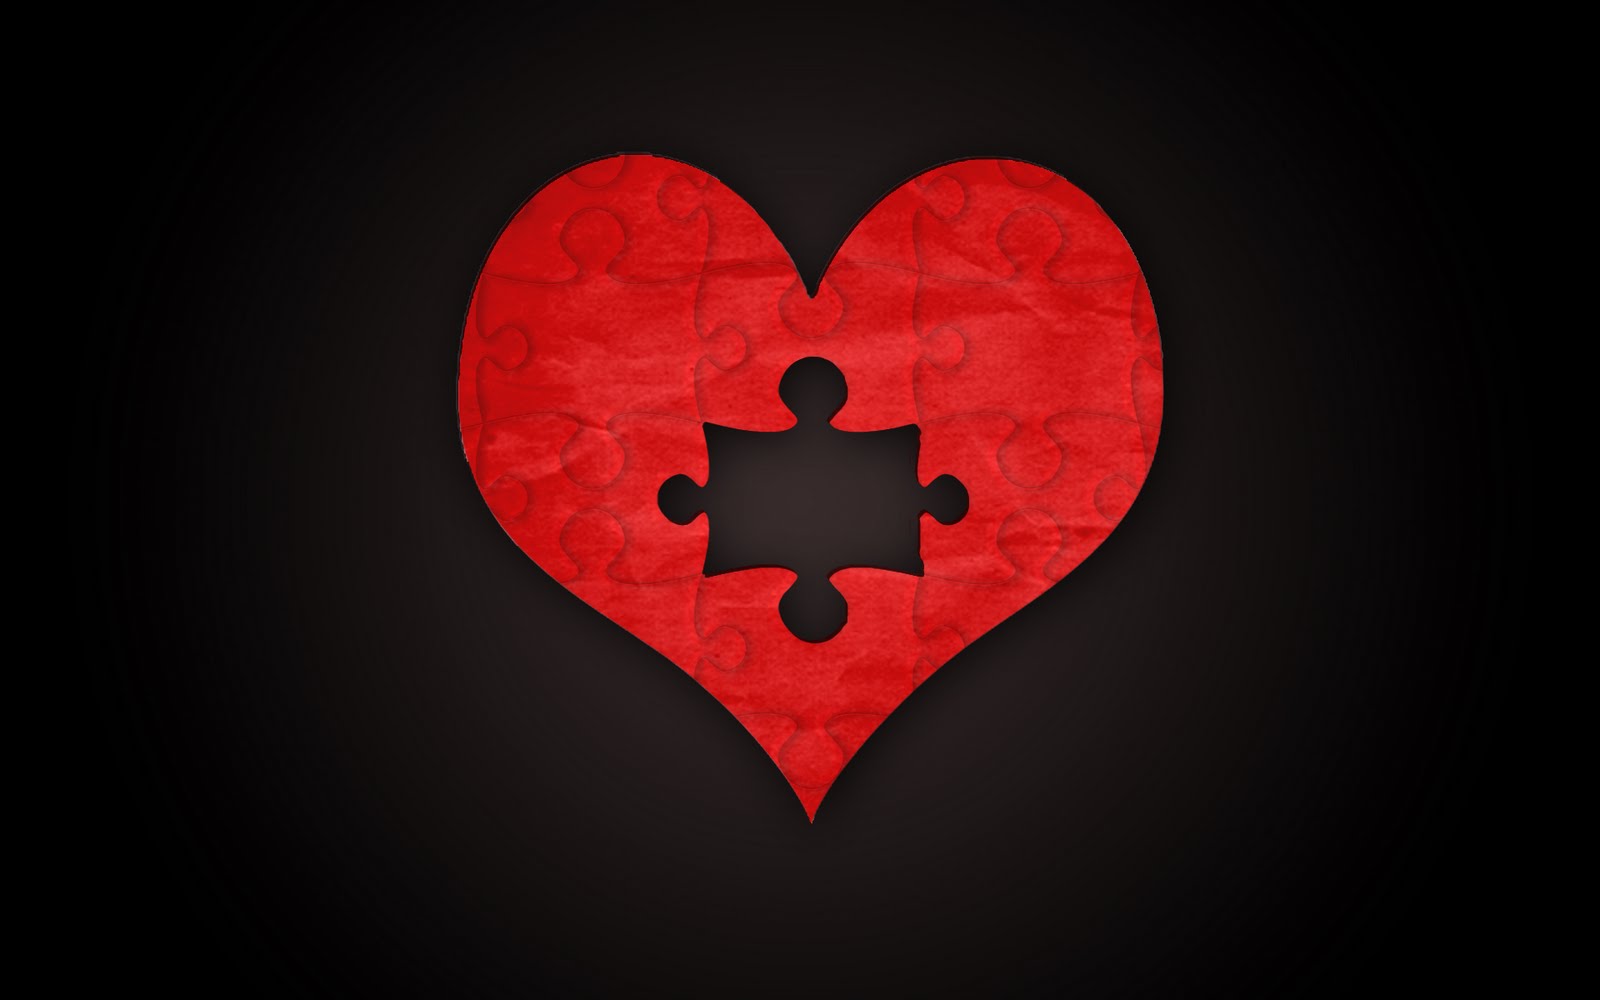 puzzle-heart-piece-missing1.jpg